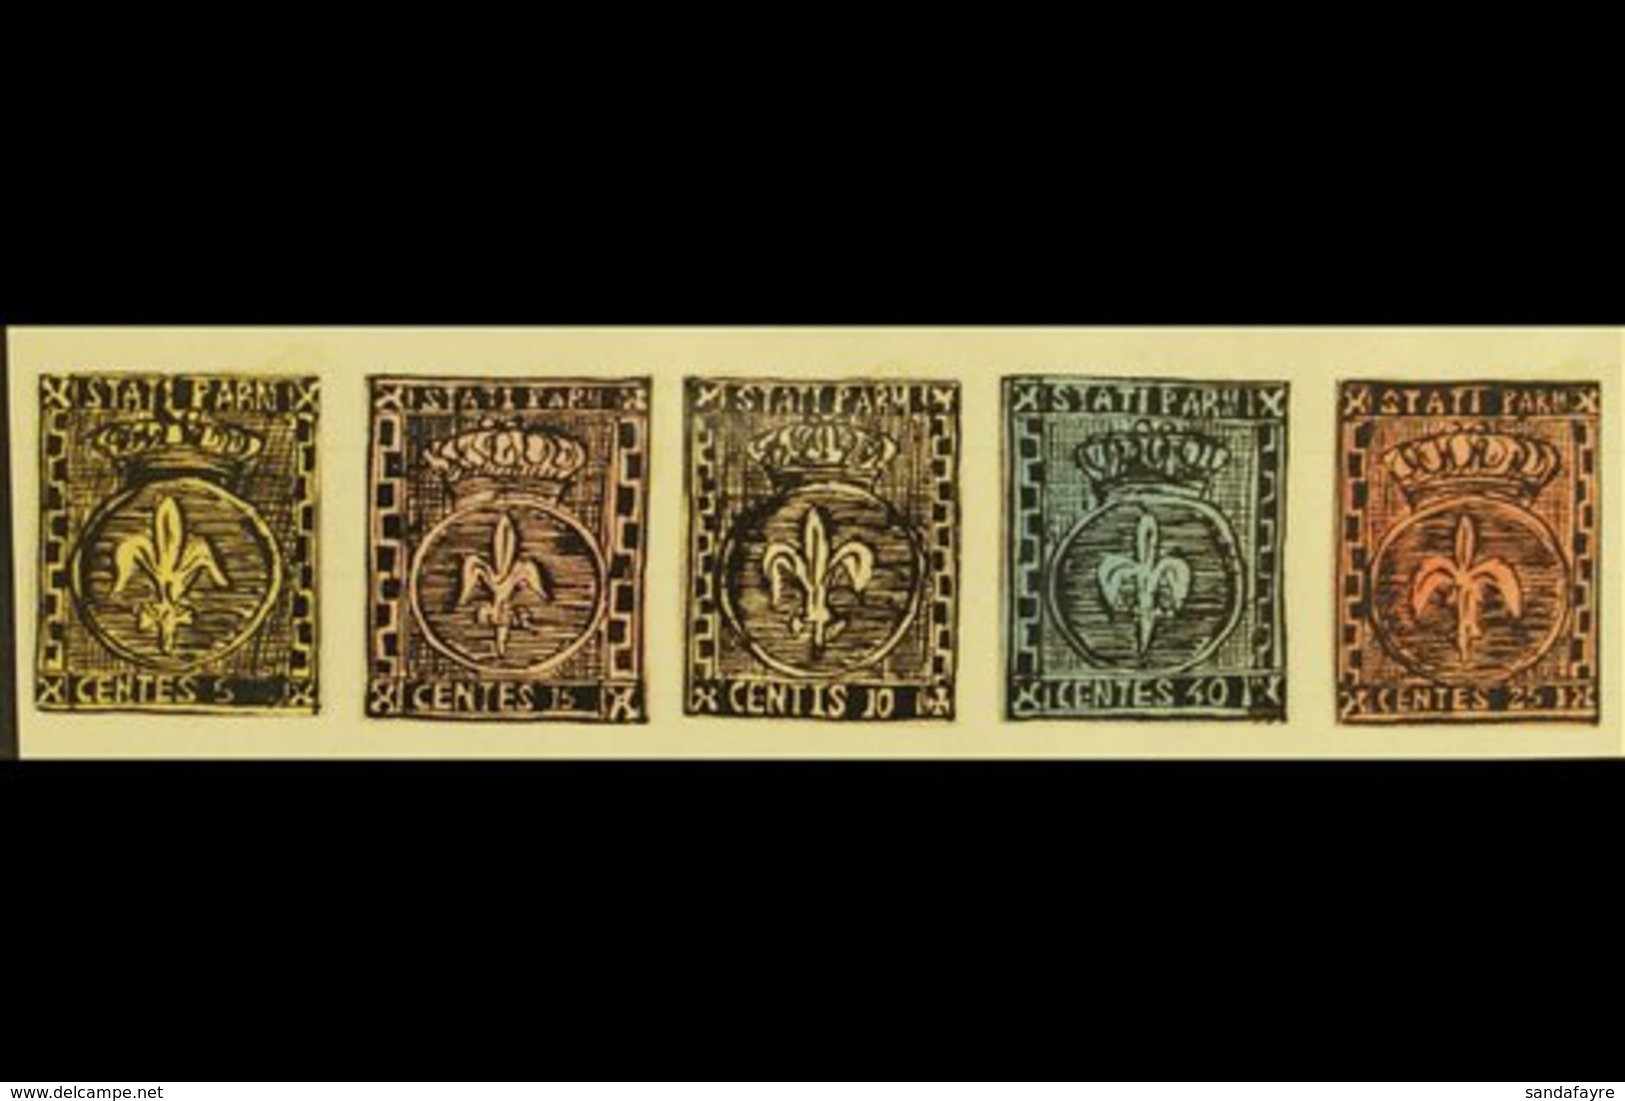 1861 HAND PAINTED STAMPS  Unique Miniature Artworks Created By A French "Timbrophile" In 1861. PARMA Five Values, Simila - Unclassified